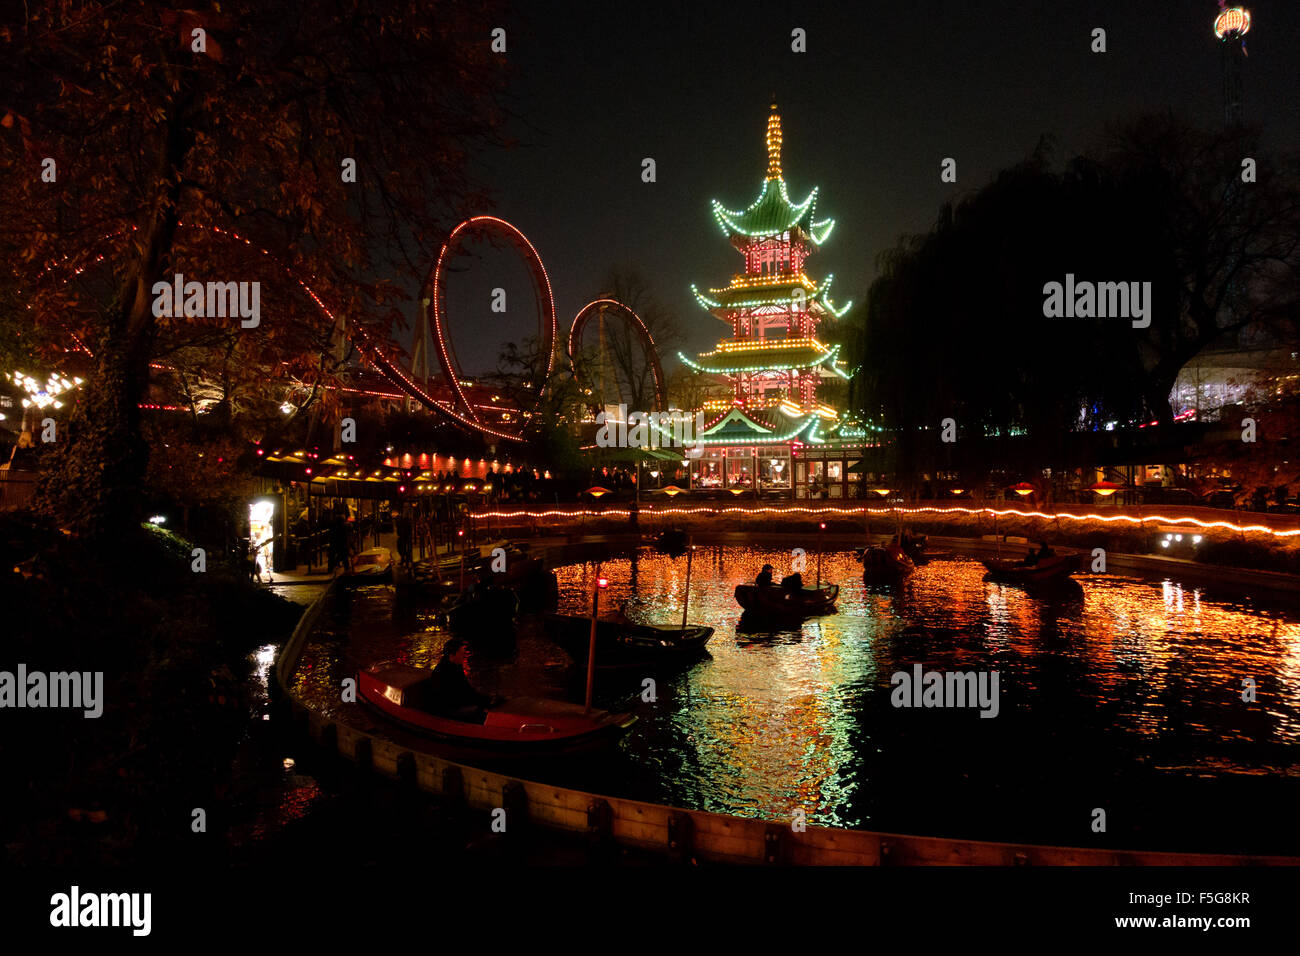 The Dragon Boats in the lake in front of the Japanese Tower restaurant and rides at night in Tivoli gardens on a dark Halloween Stock Photo